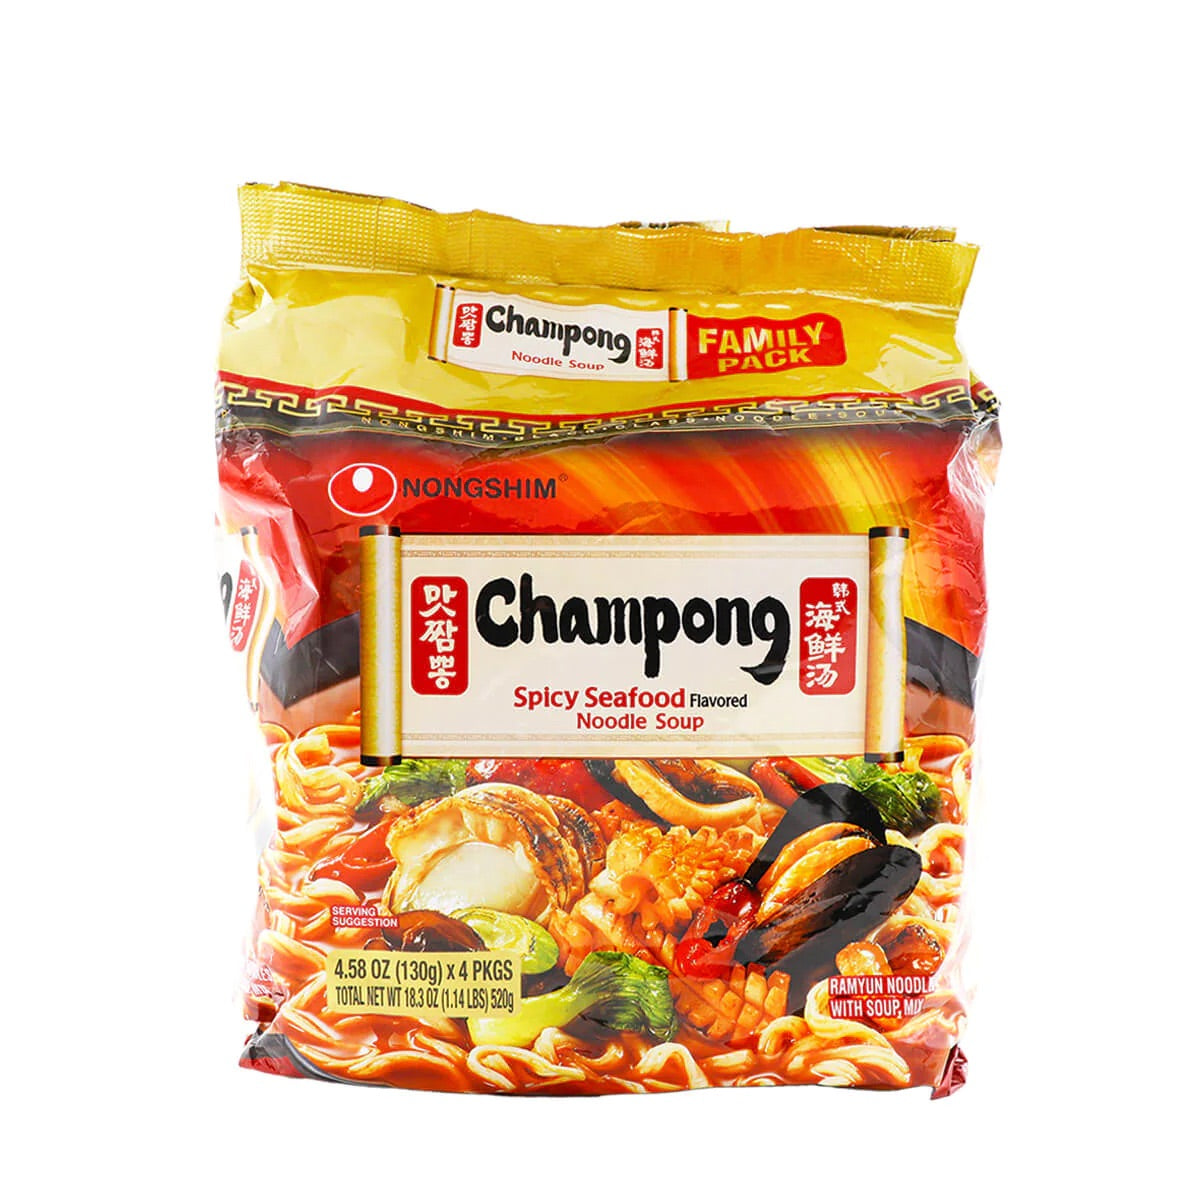 Nongshim Champong Spicy Seafood (4 packs) - 520g/18.3oz